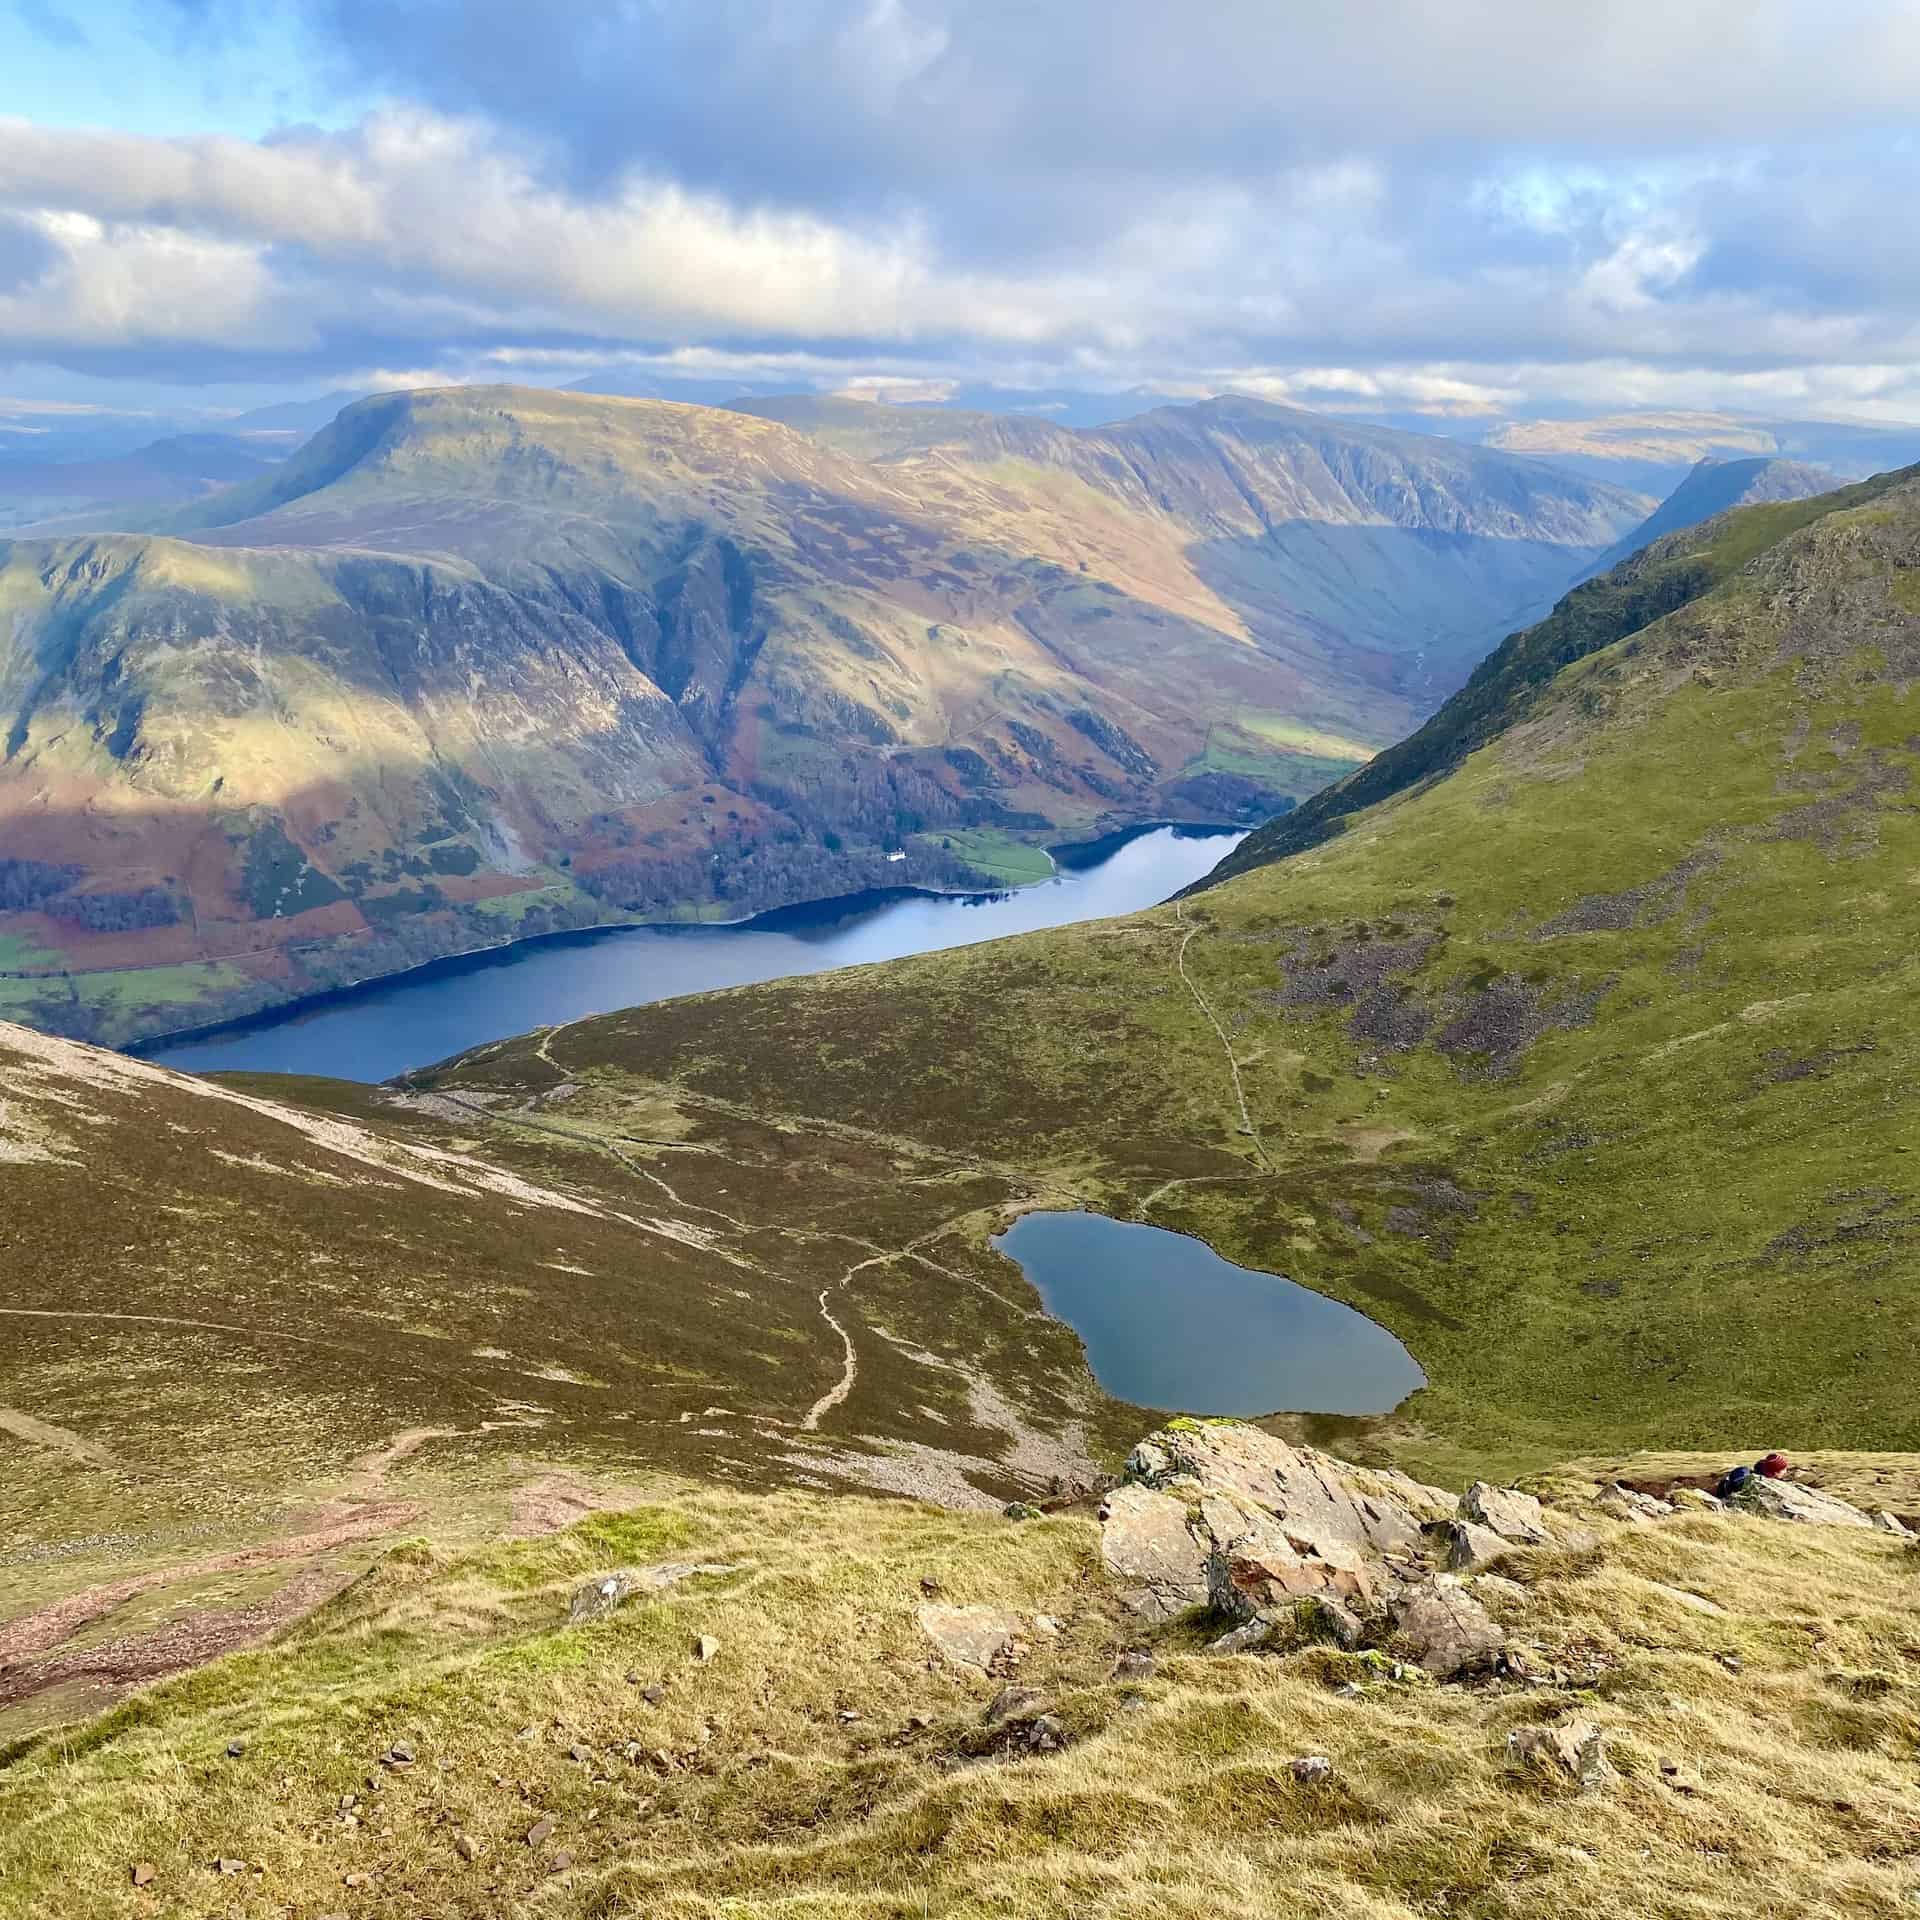 The view down to Bleaberry Tarn and Buttermere from the Red Pike summit, height 755 metres (2477 feet). Red Pike is the first of the three mountains encountered on this High Stile walk.